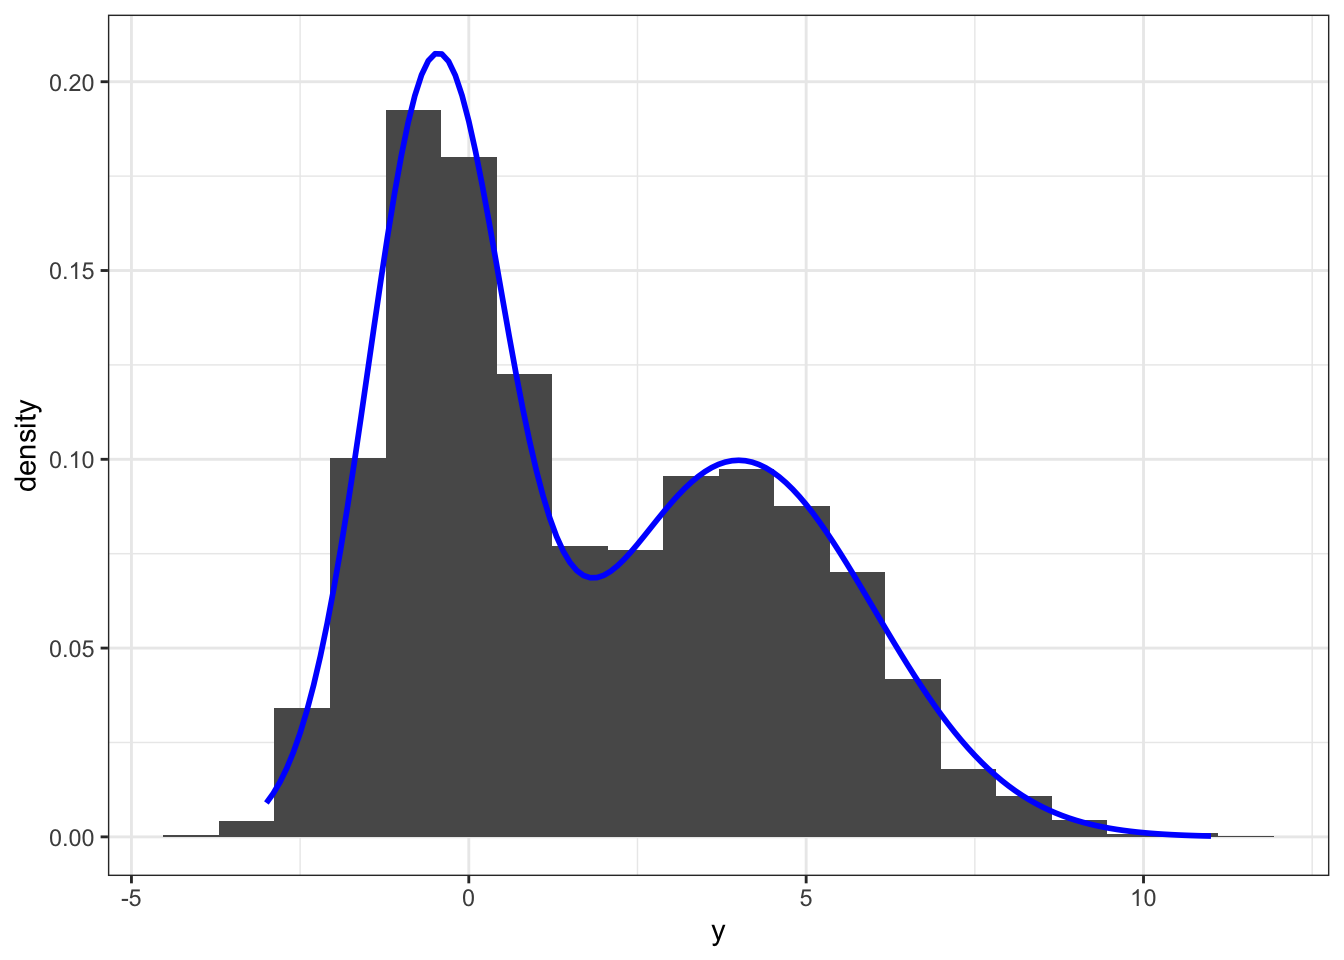 Histogram and density estimate (red) of data simulated from a two-component Gaussian mixture distribution. The true mixture distribution has 